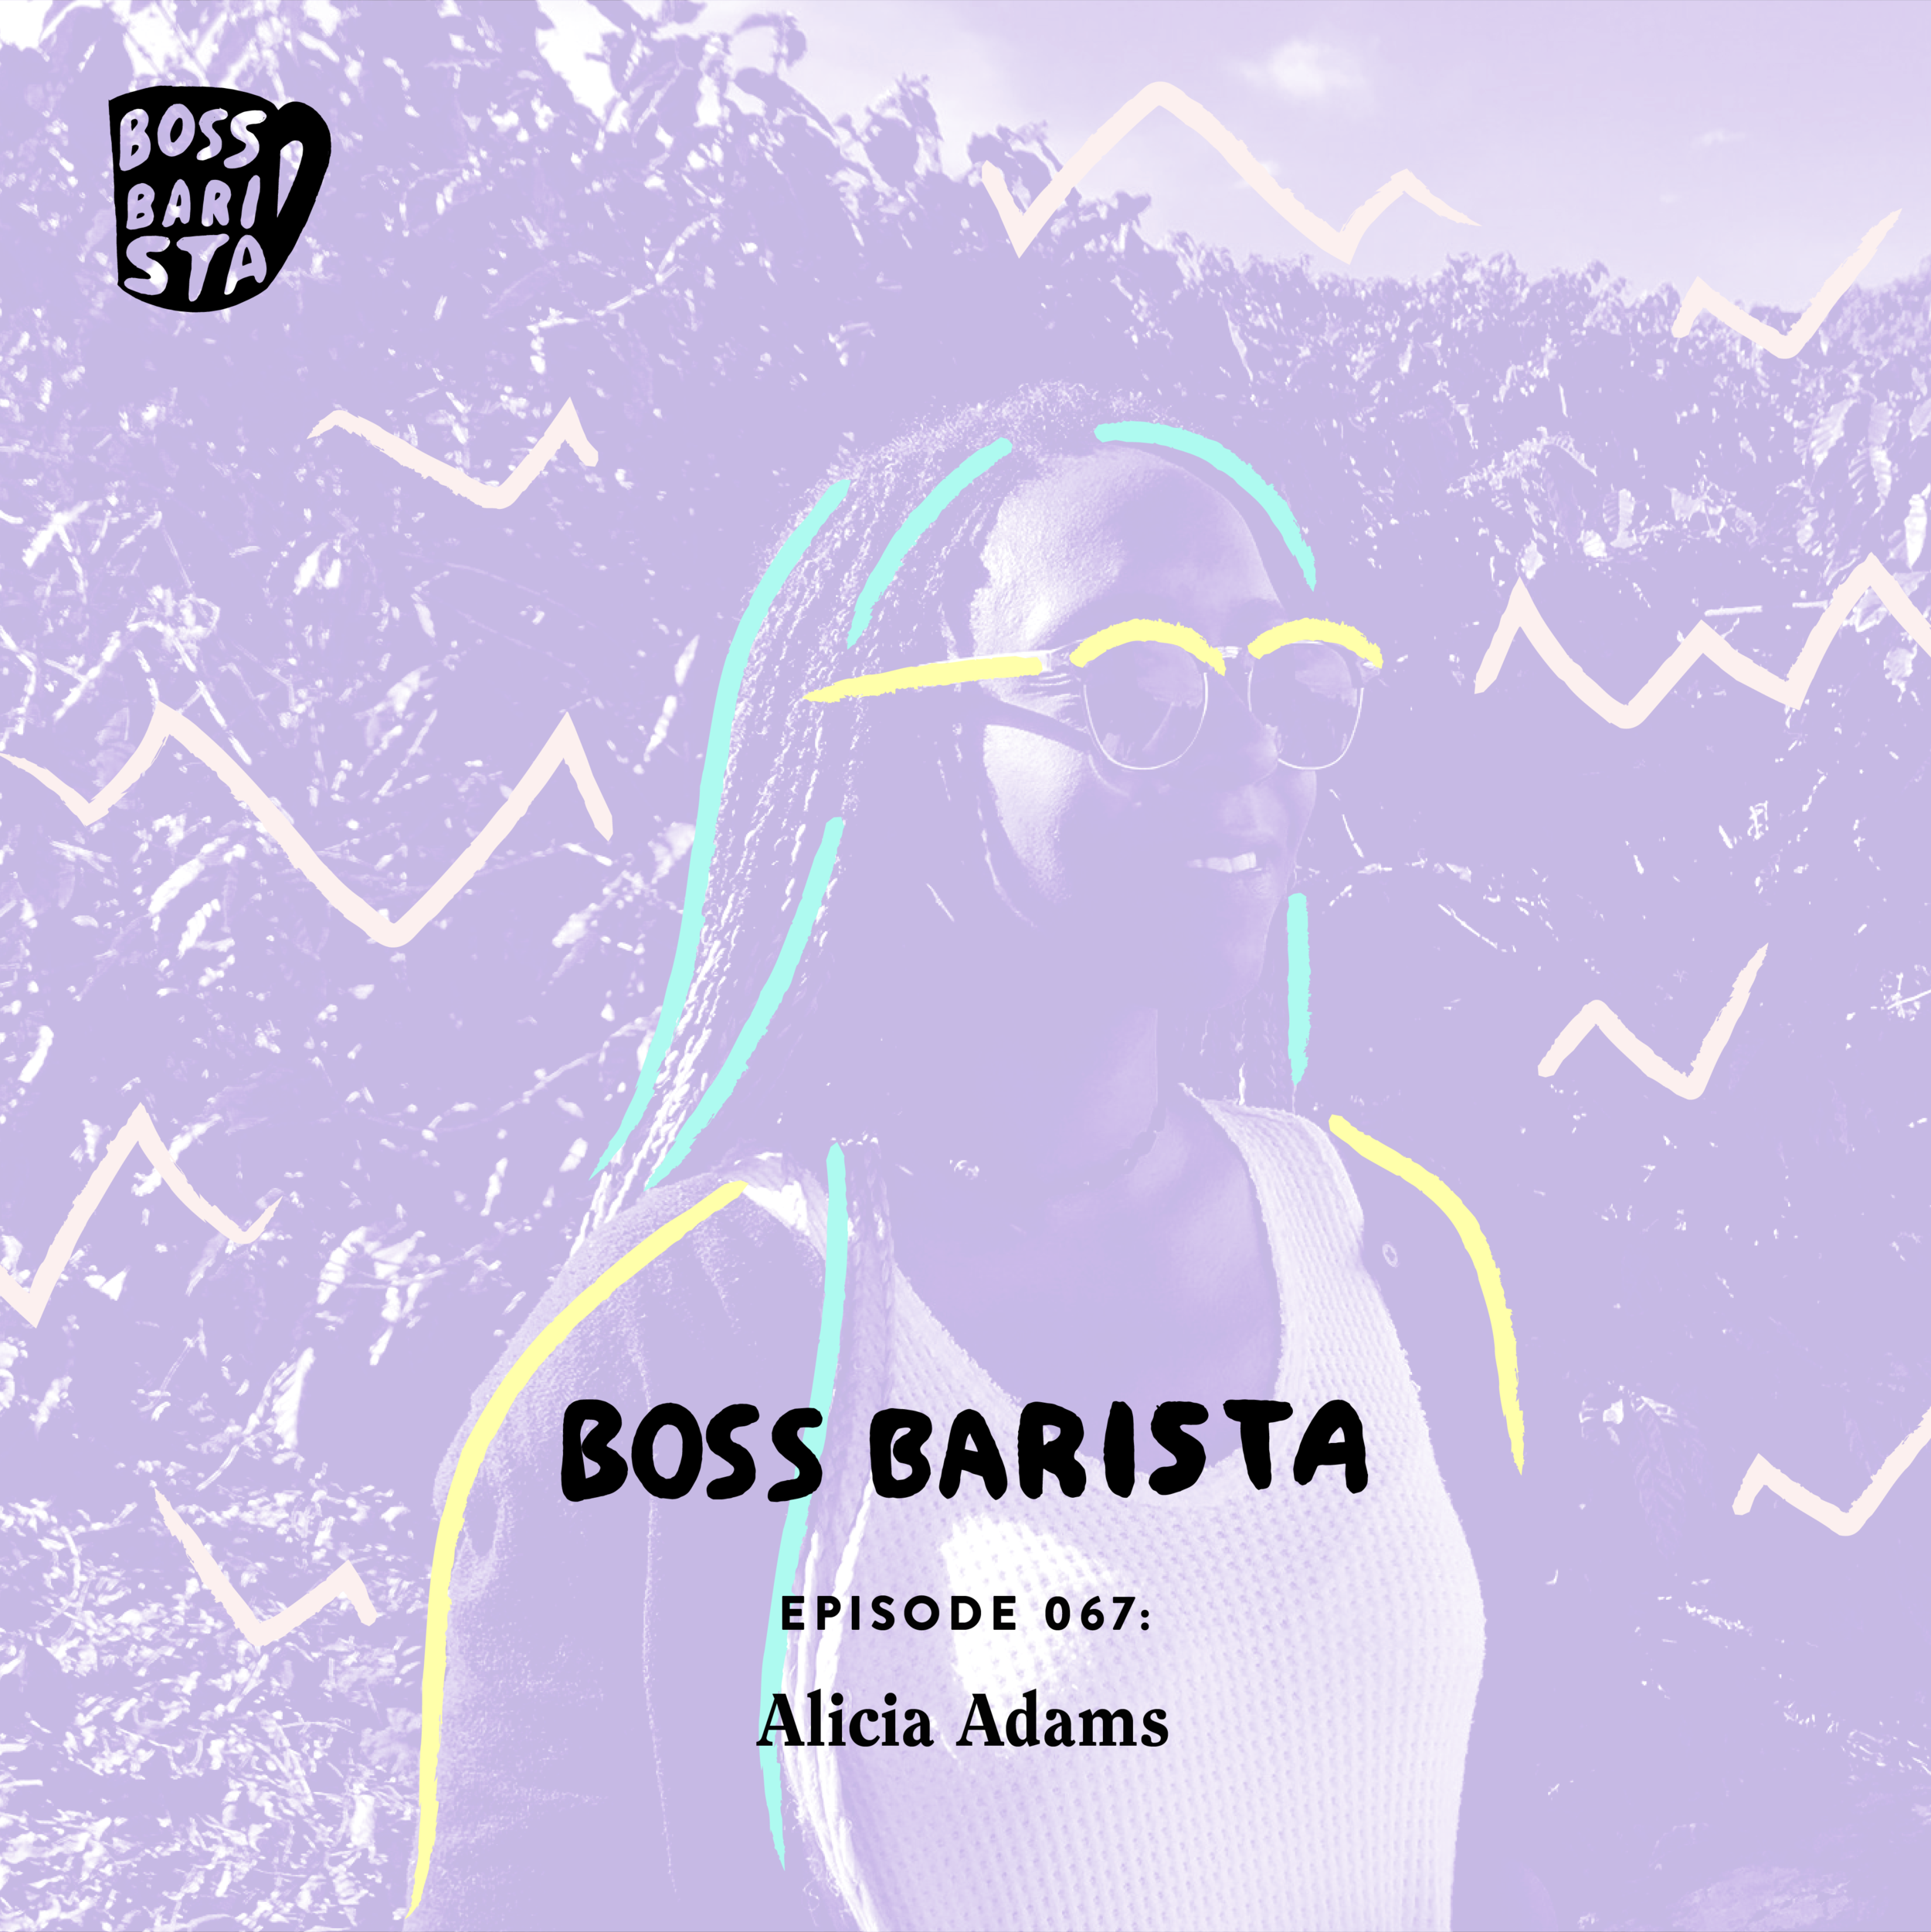 Boss_Barista_067_Cover_EPISODE_COVER.png